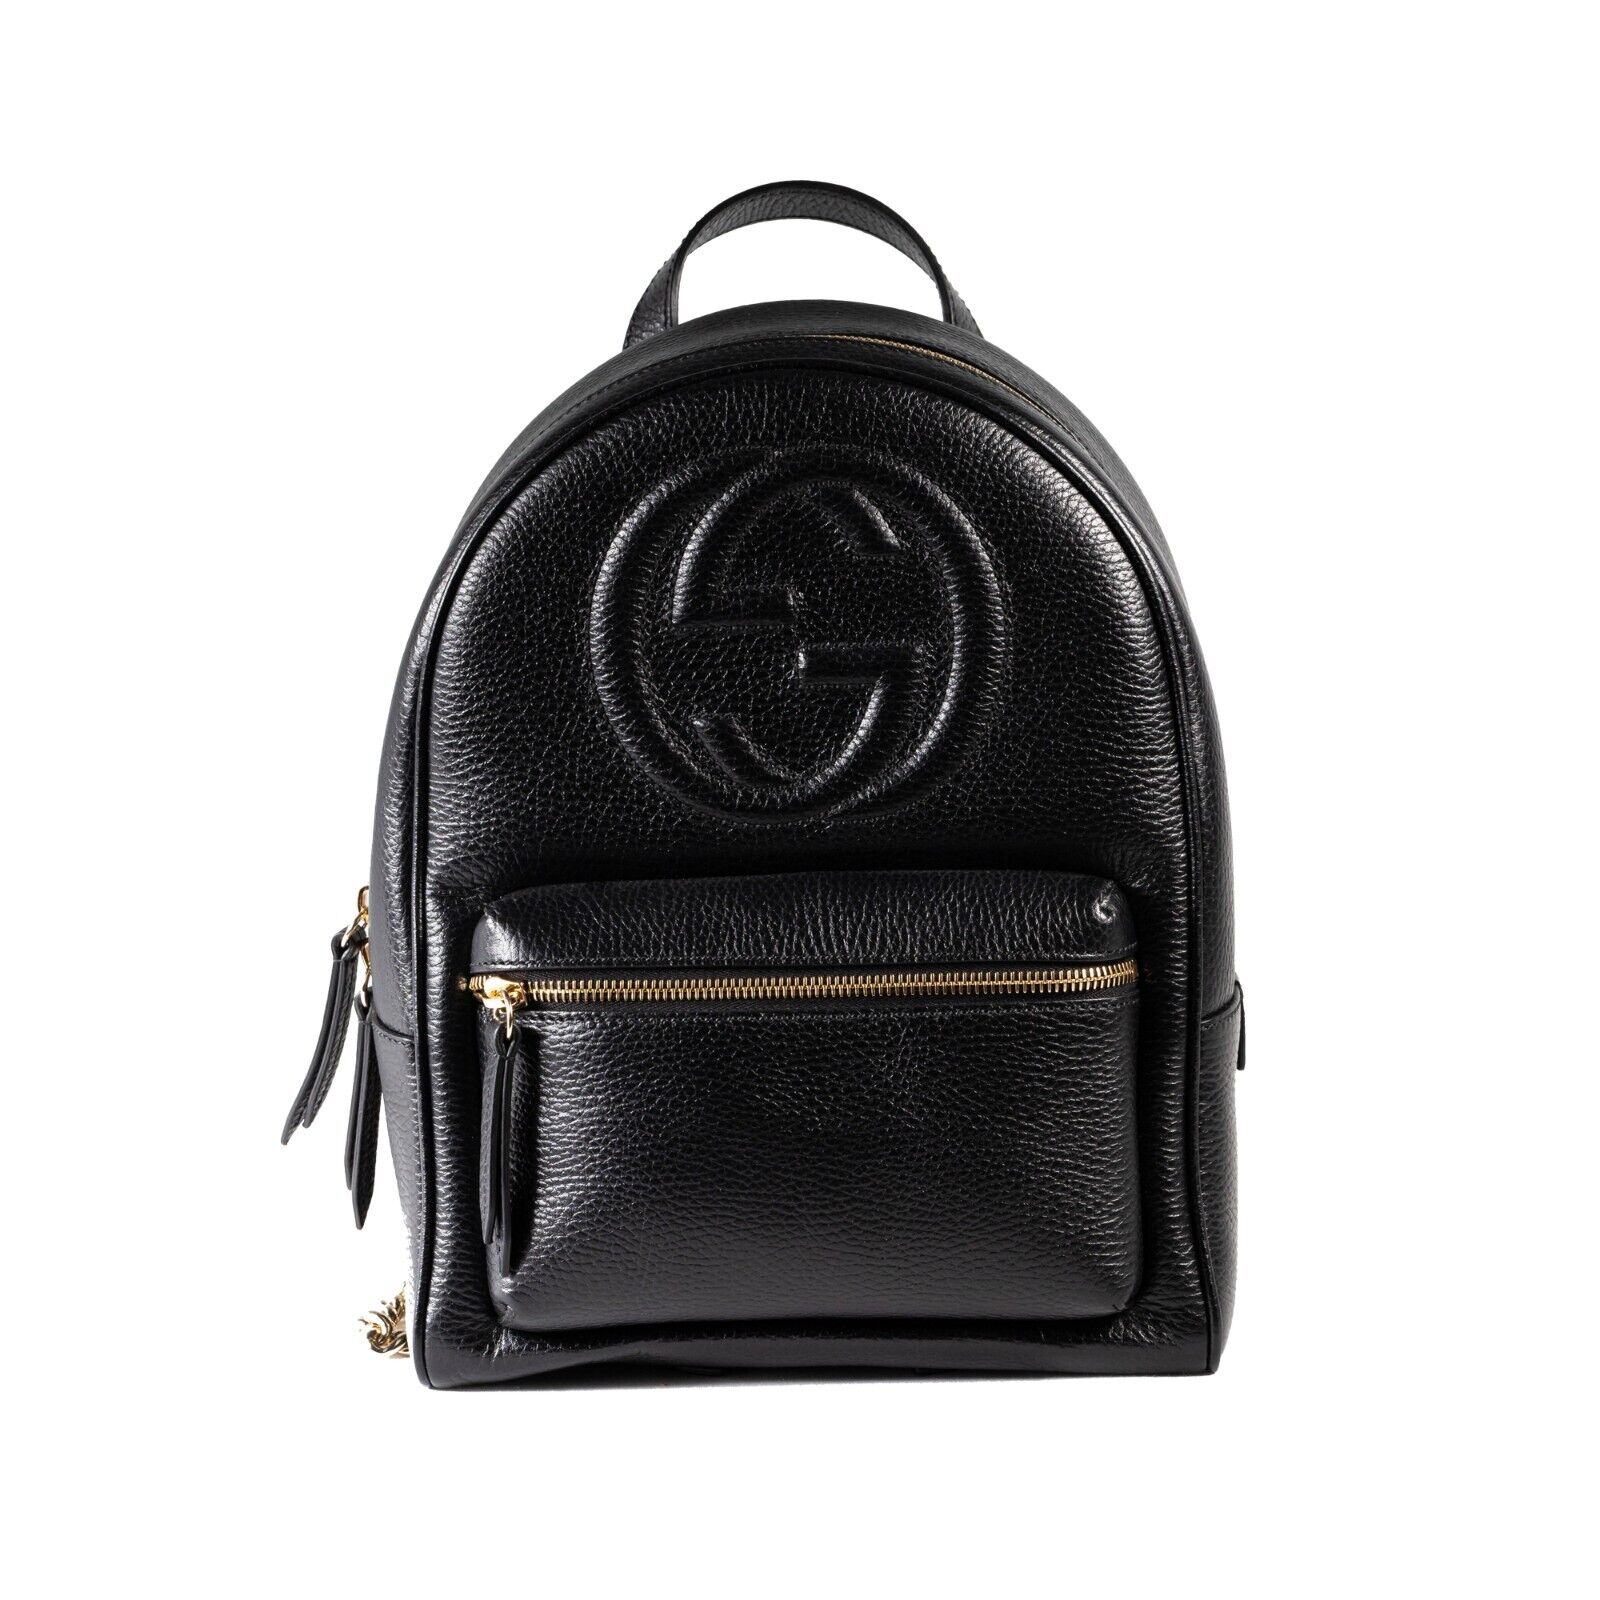 Gucci Soho Backpack Black Leather Gold Chain Straps - 888108406029